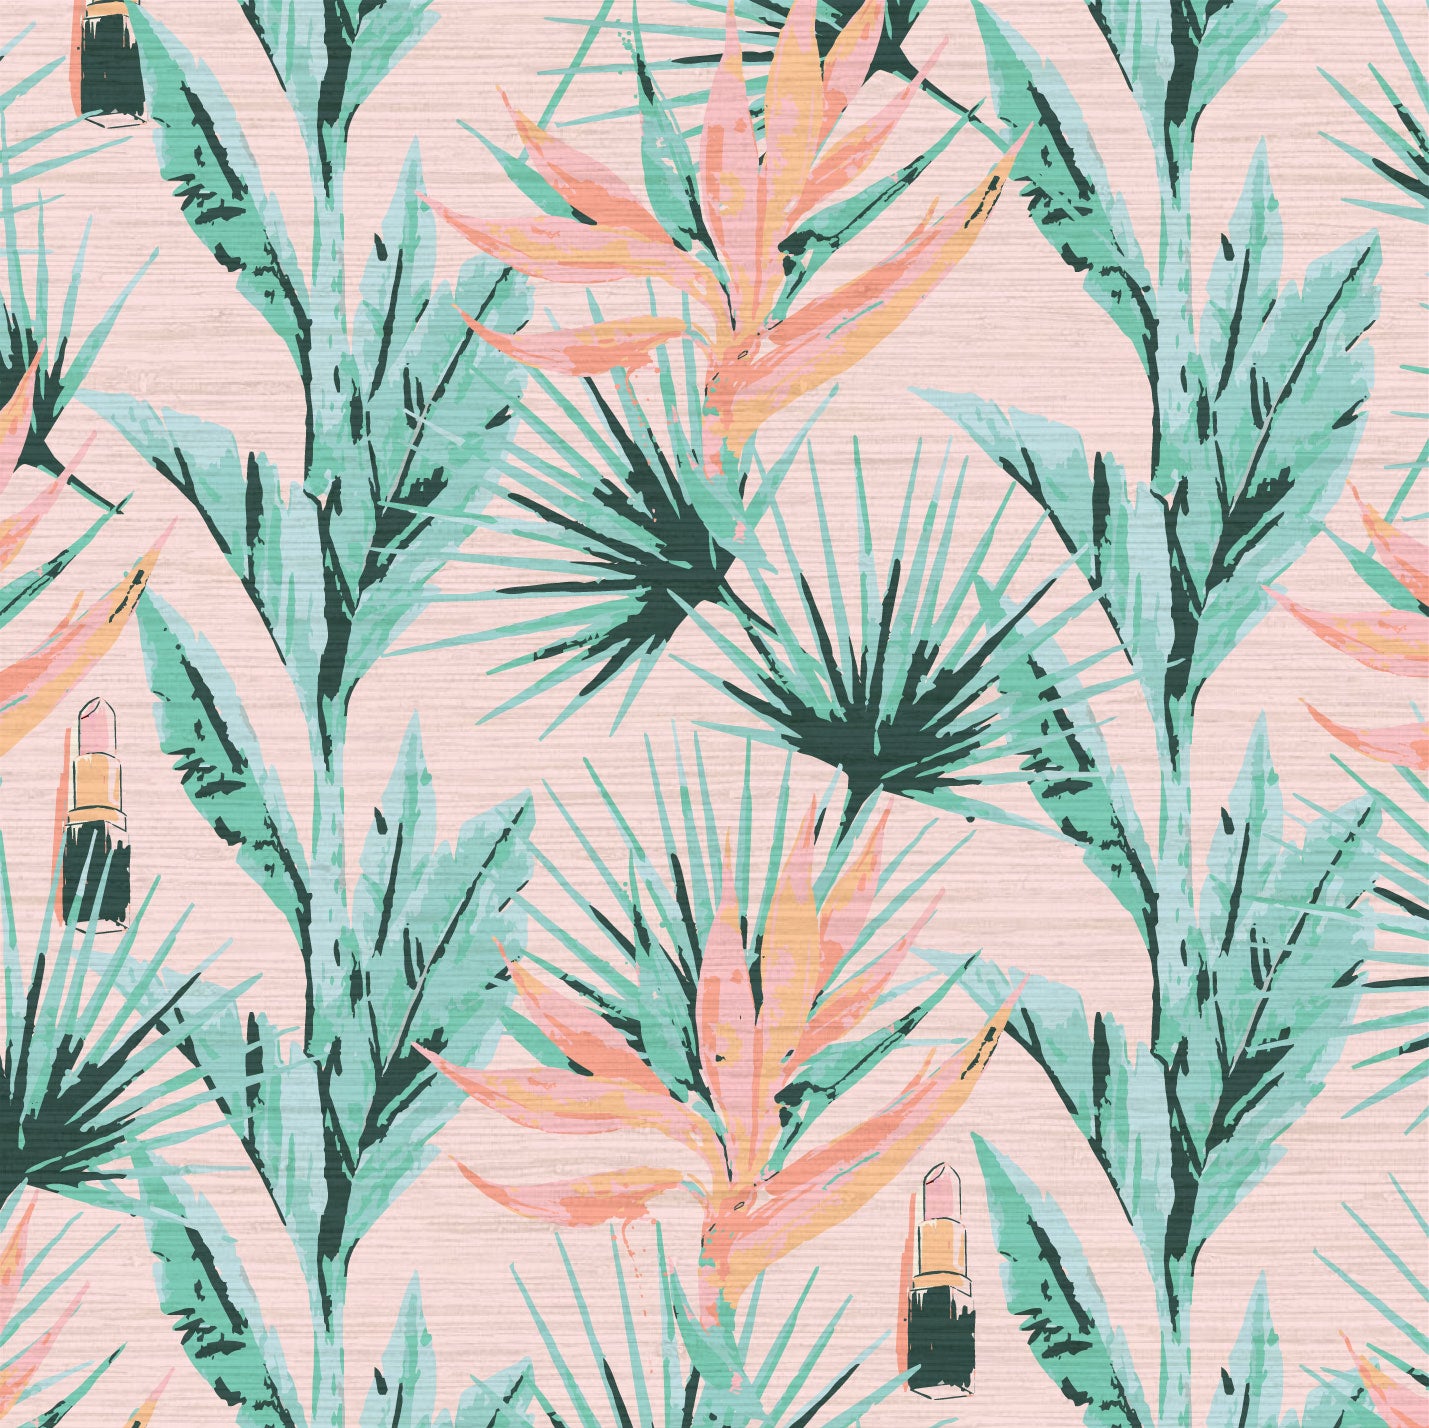 printed grasscloth wallpaper light pink based allover floral print with light pink and orange birds of paradise floral paired with shades of green palm leaves with added light pink lipstick tubes scattered throughout the print. Natural Textured Eco-Friendly Non-toxic High-quality  Sustainable practices Sustainability Interior Design botanical medspa beauty salon custom  wall cover garden